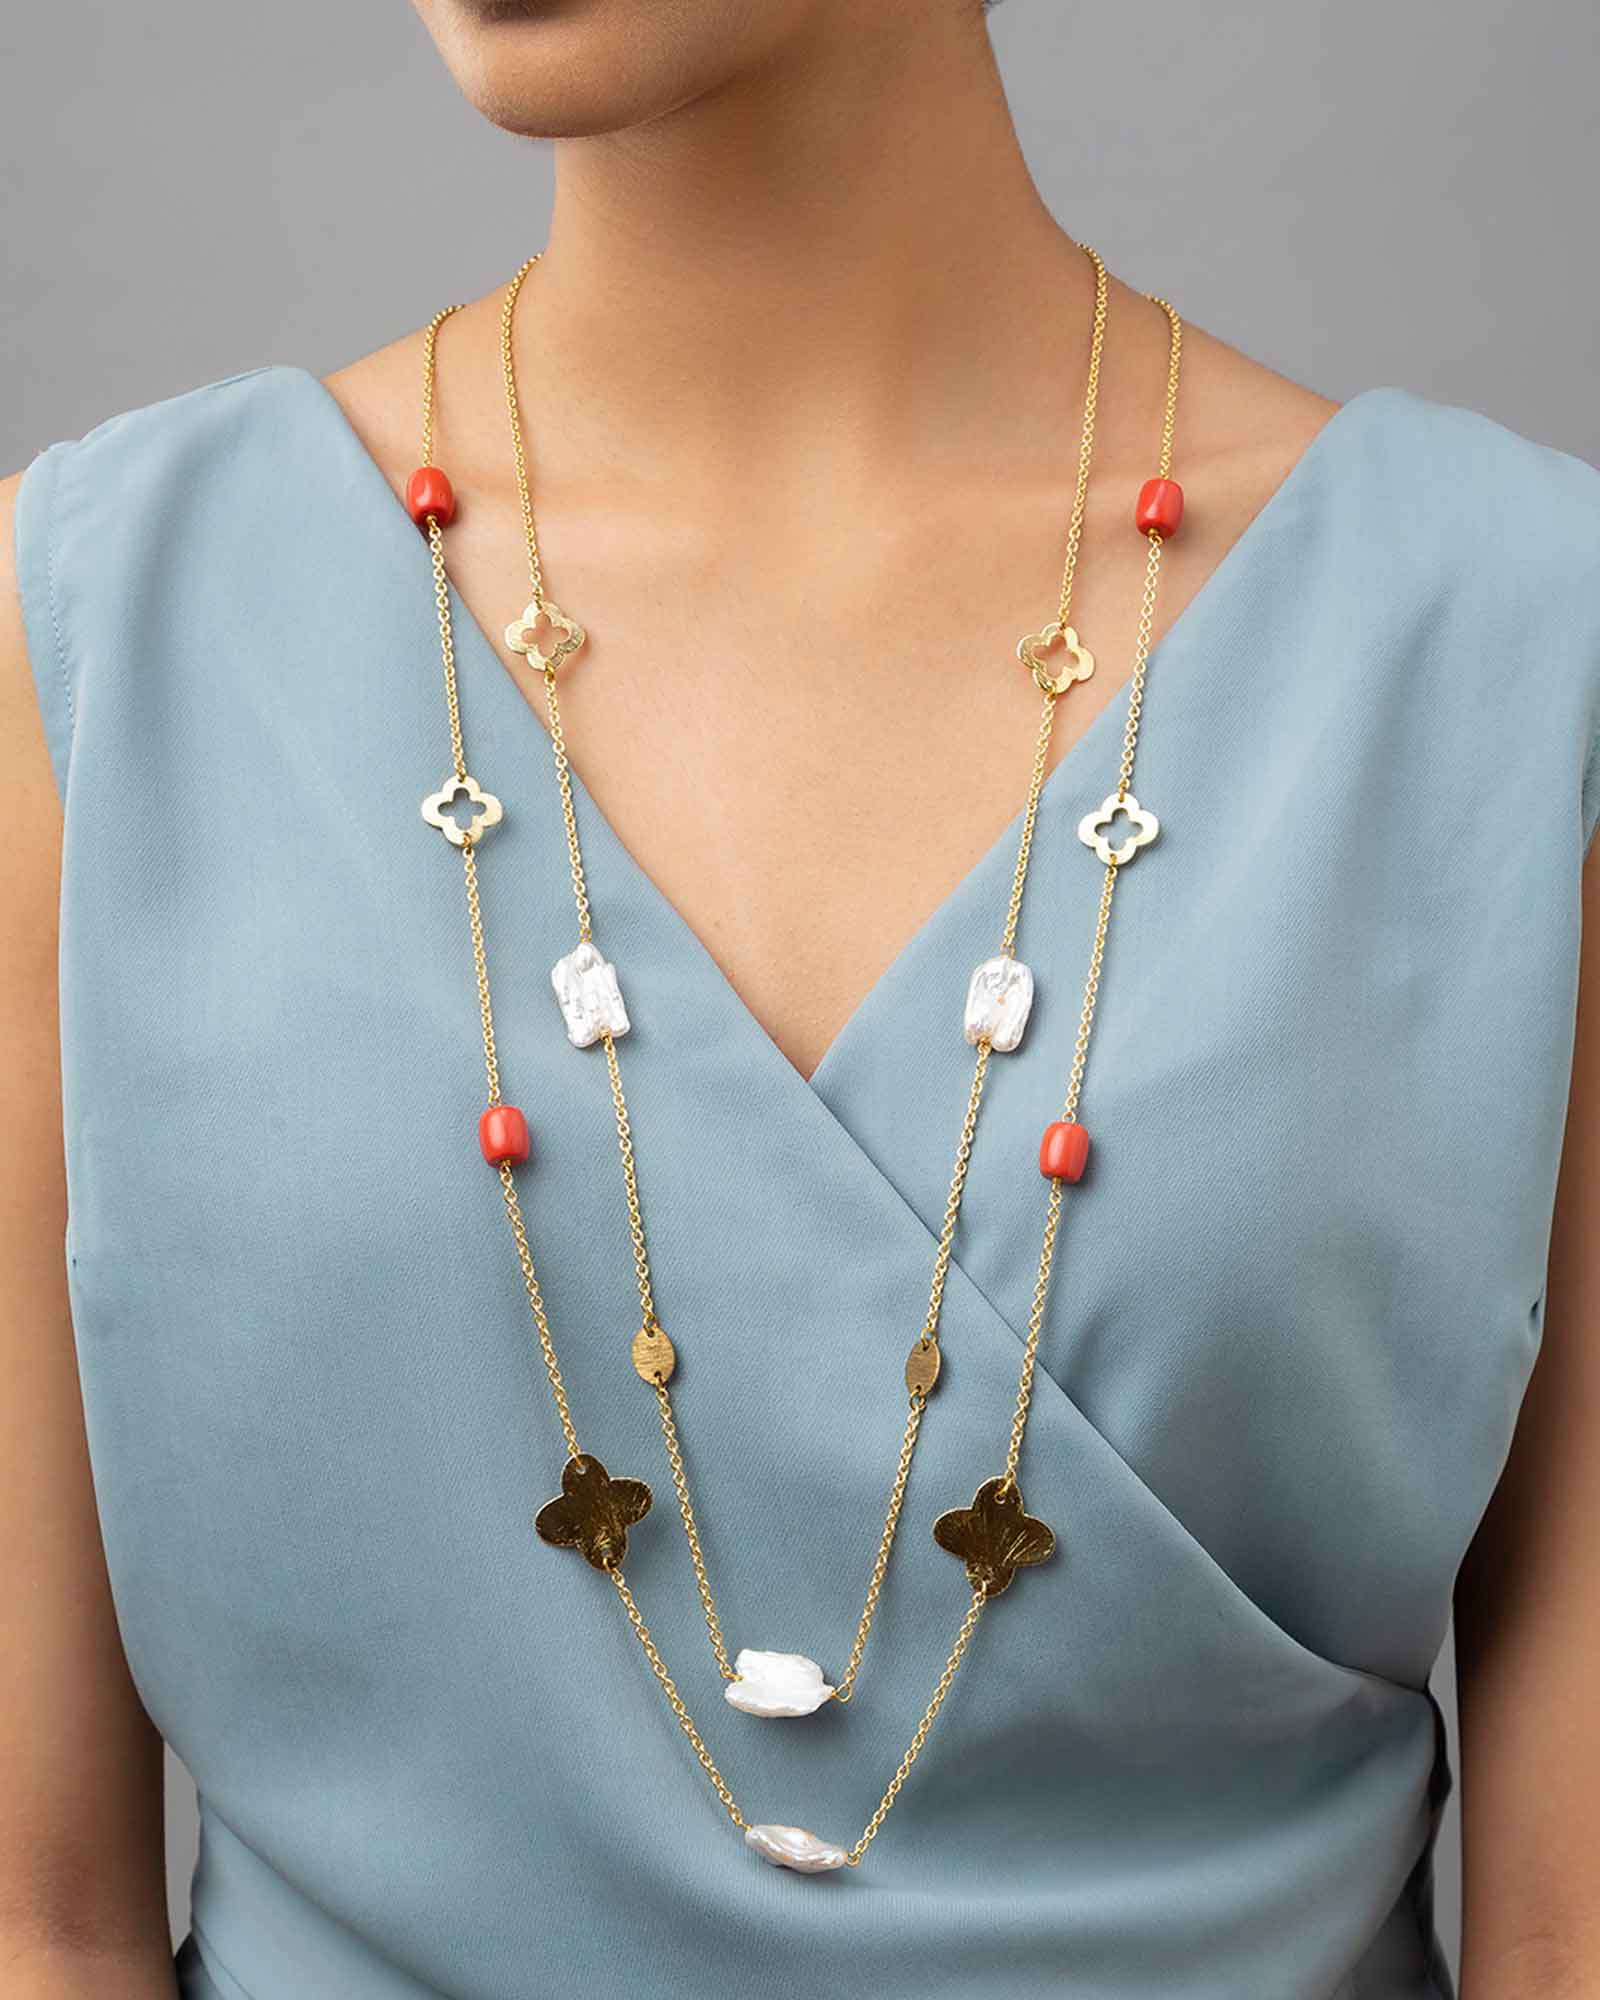 Coral Shaped Beaded Necklace | SHEIN